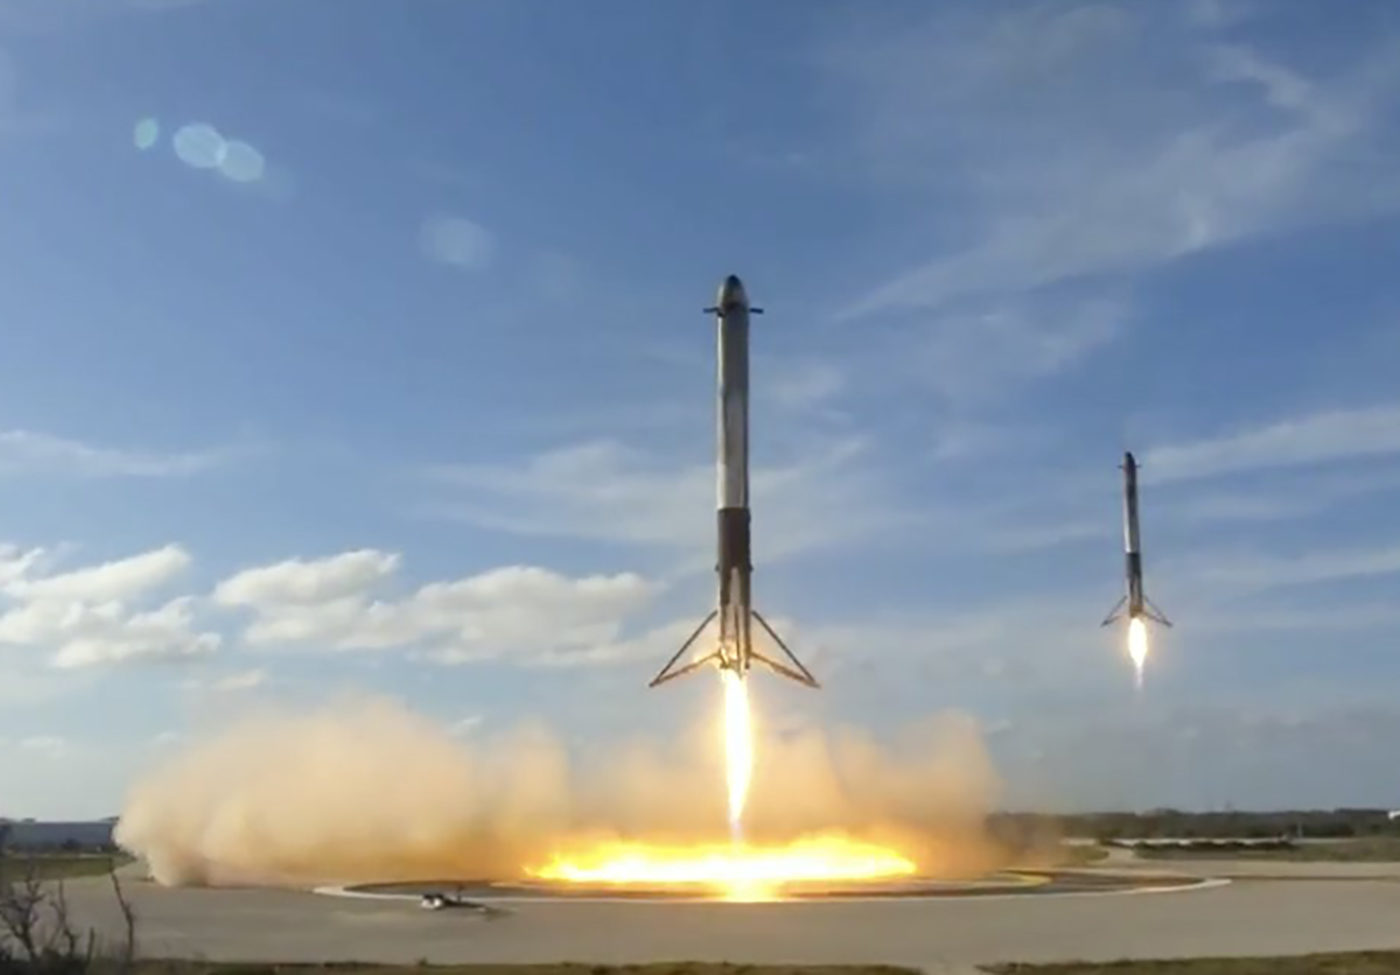 Screen capture of 2 Falcon Heavy Boosters landing at the same time, taken from SpaceX coverage of the event 2-6-18.